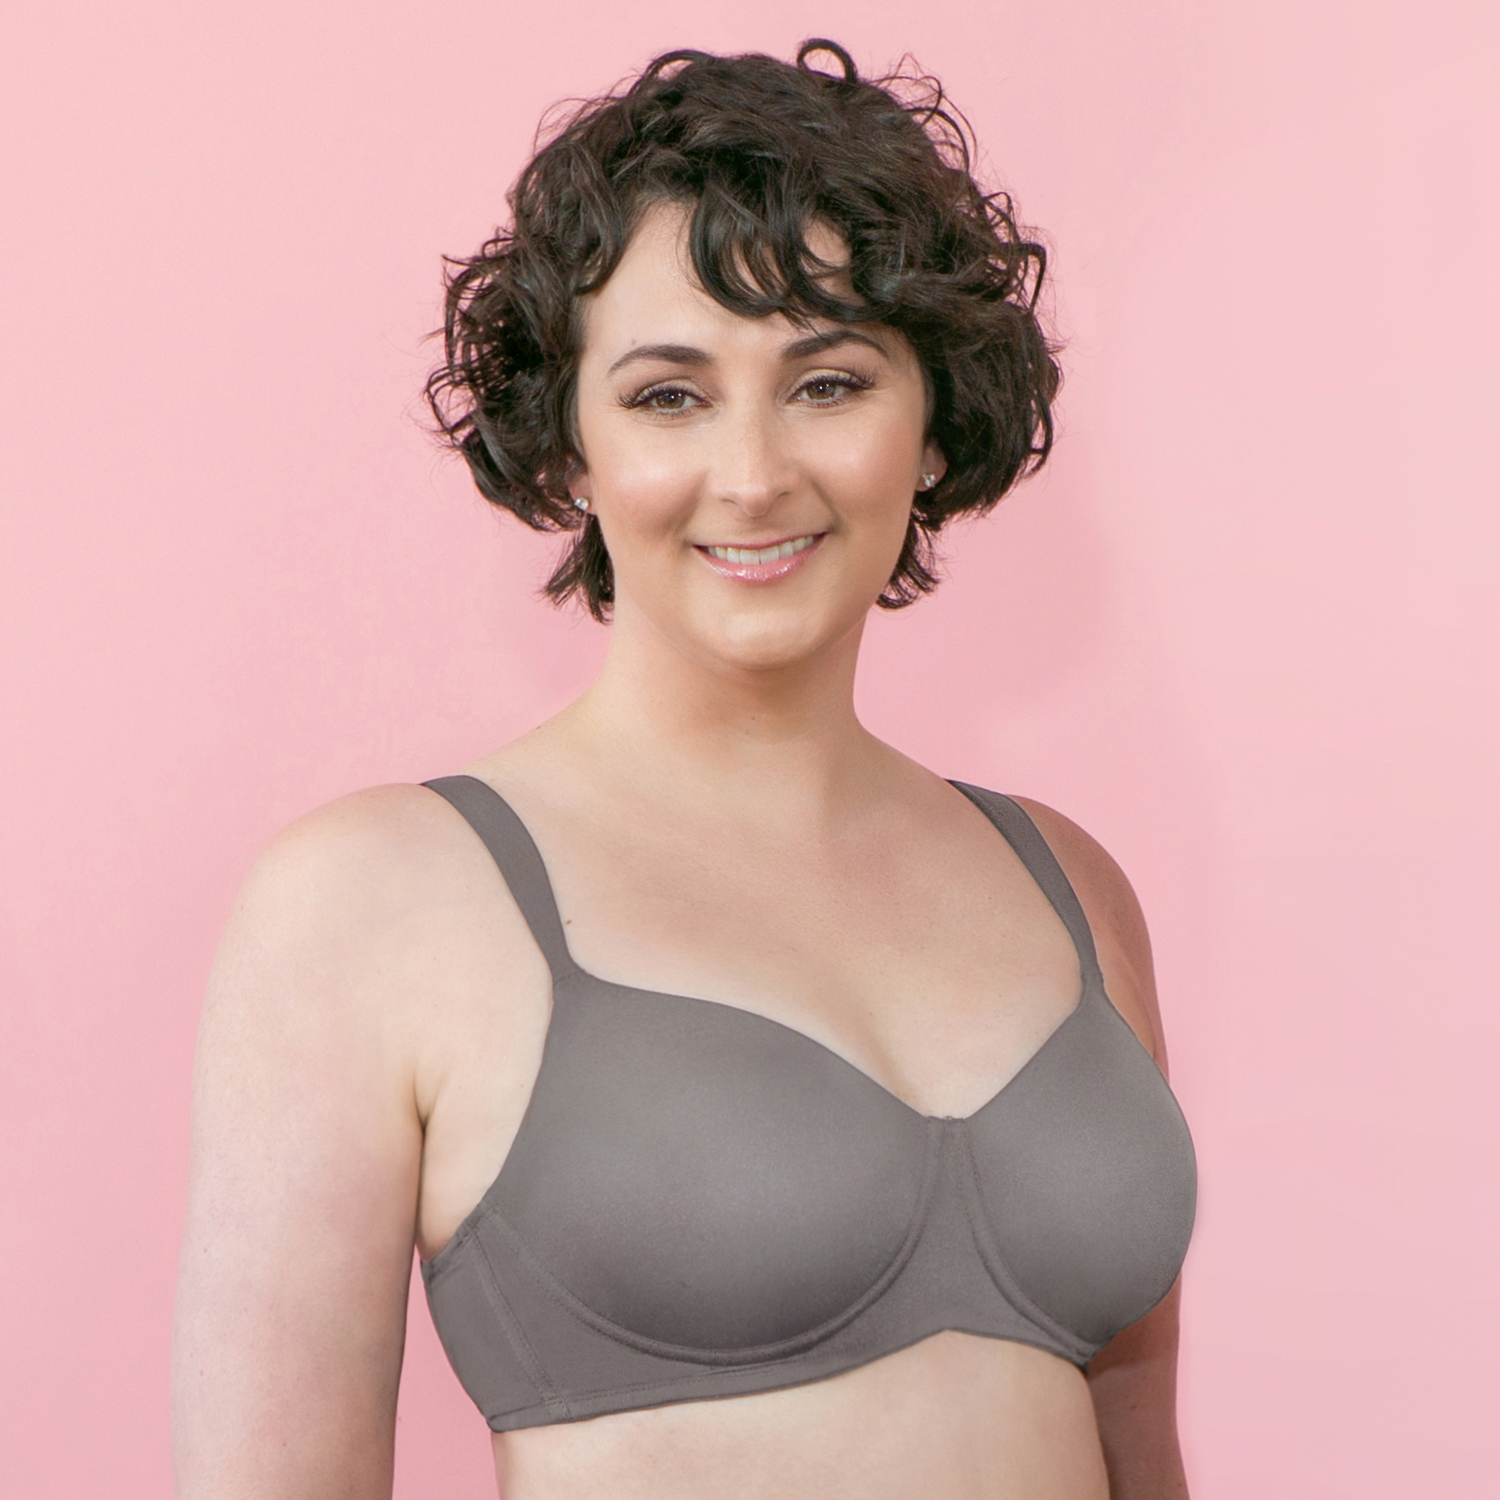 Plus Size Bras to Fit Women with a Plus Size Silhouette